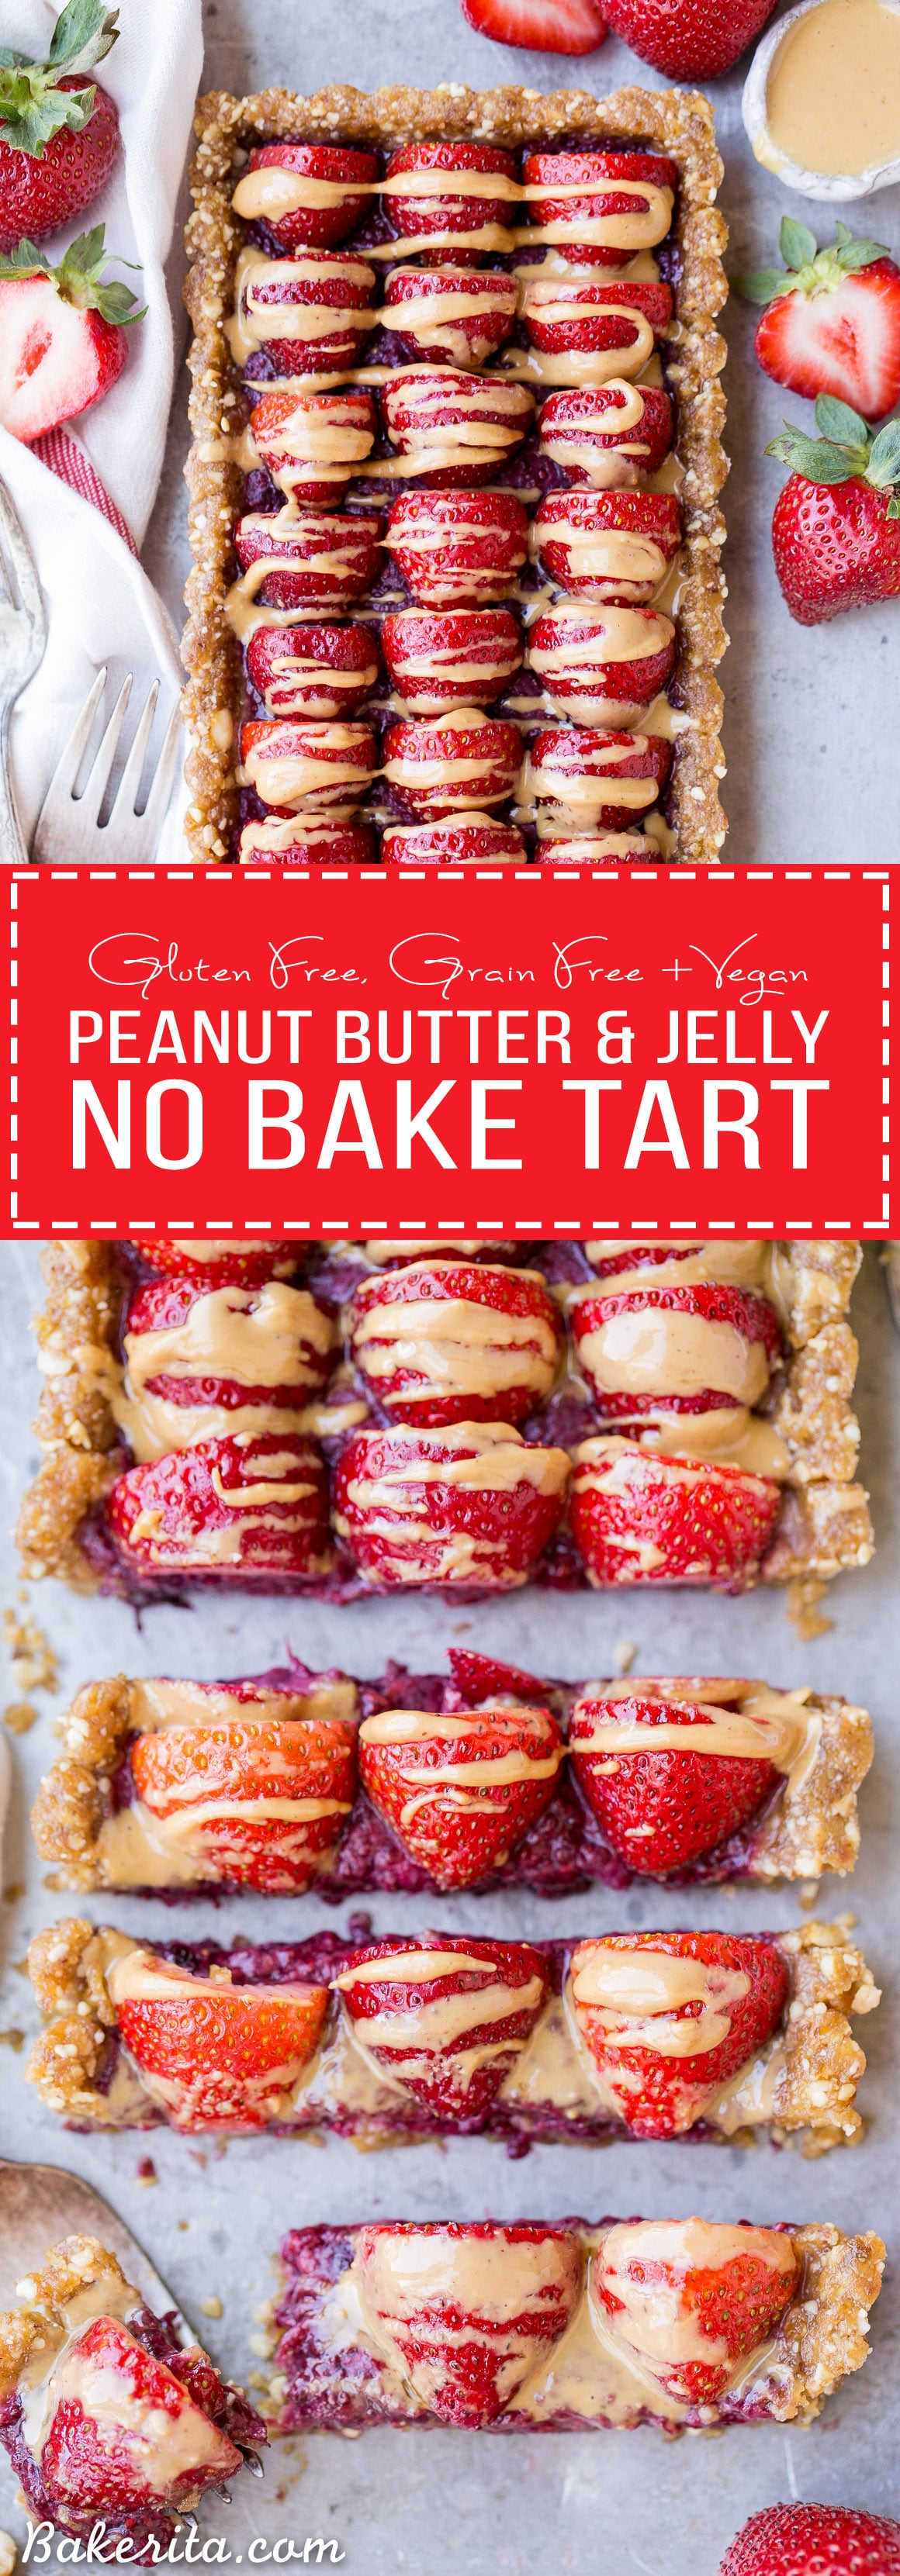 Skip the oven for this No Bake Peanut Butter & Jelly Tart - it's an easy and refreshing dessert made with just seven ingredients! It has a peanut date crust filled with berry chia jam. This rich and fruity tart is gluten-free, grain-free, refined sugar-free and vegan.